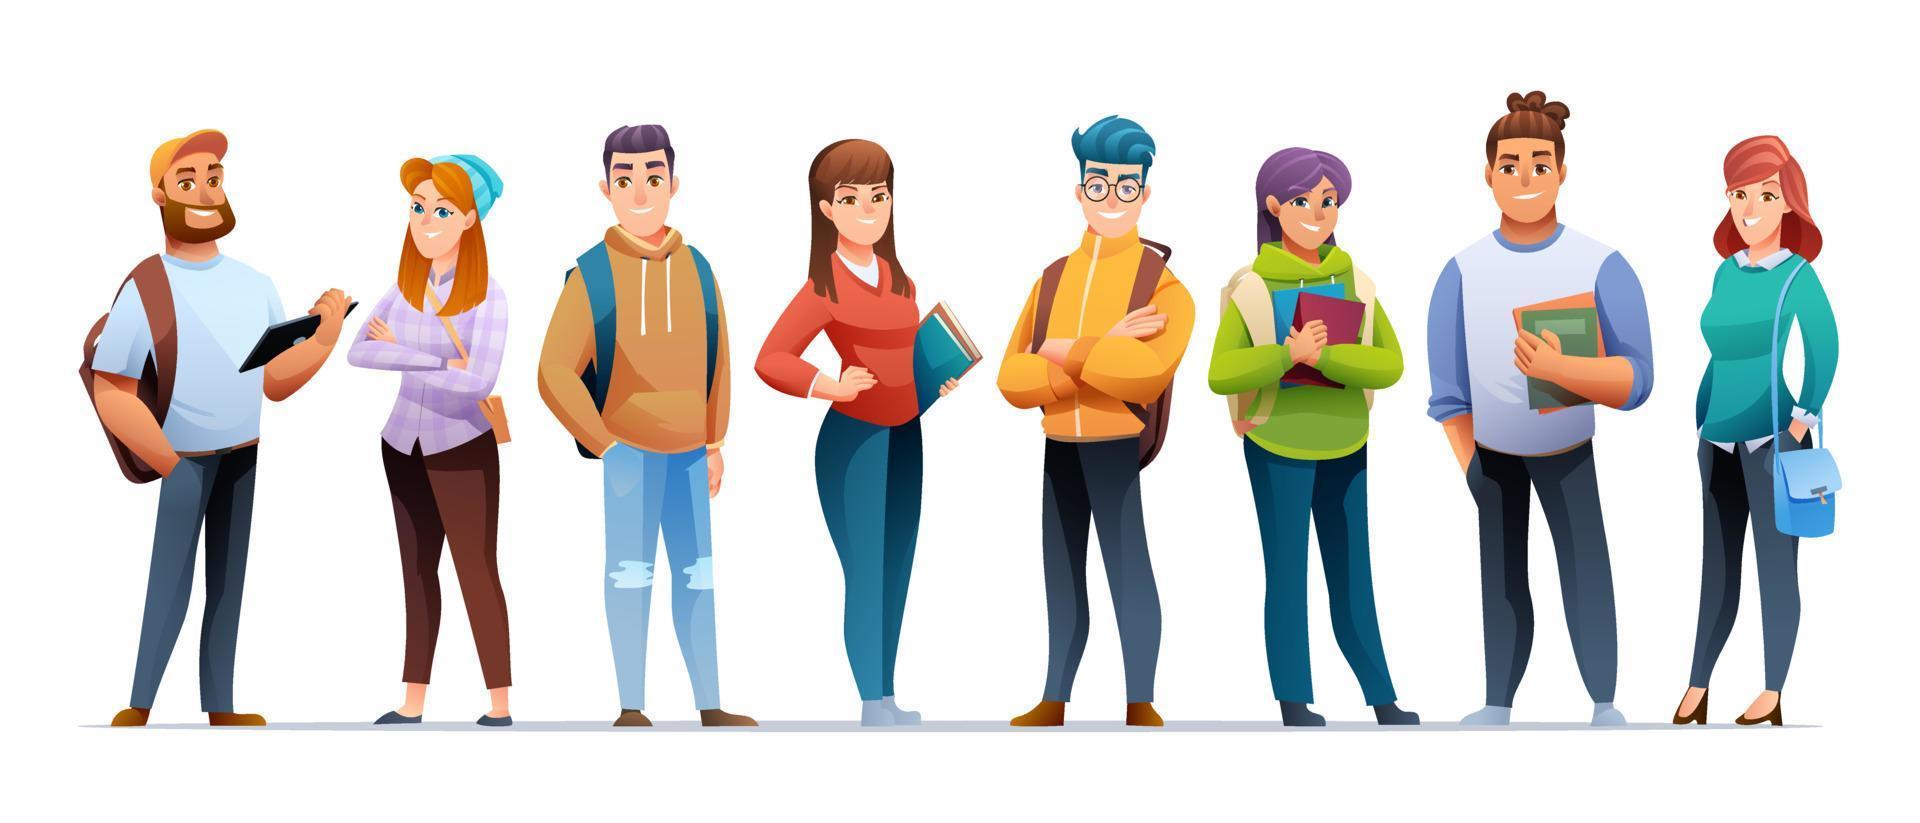 Set of young student characters in cartoon style vector